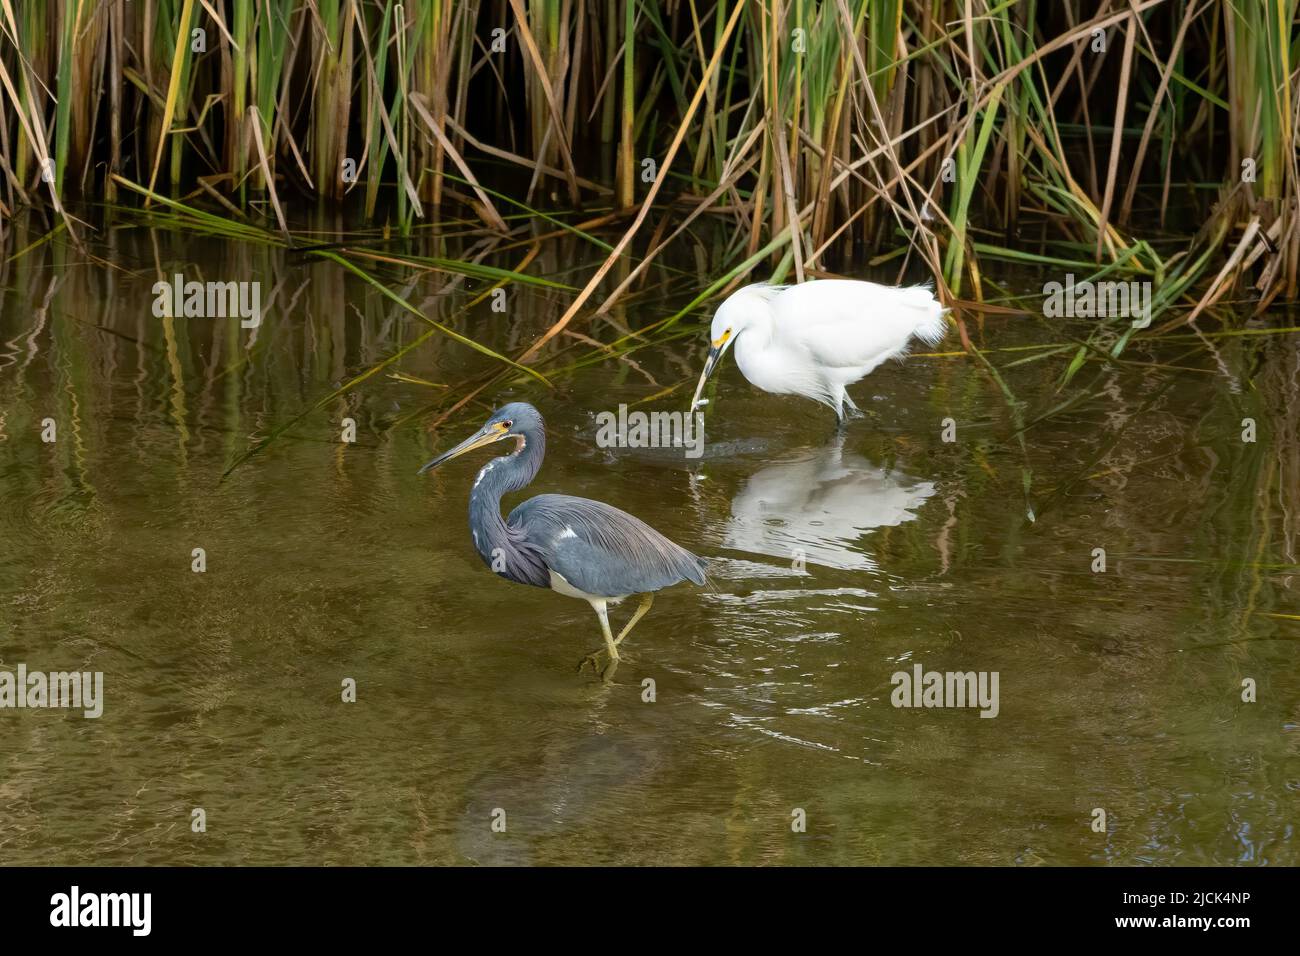 A Snowy Egret, Egretta thula, with a small fish in its bill in a wetland marsh in the South Padre Island Birding Center in Texas.  In front is a Trico Stock Photo